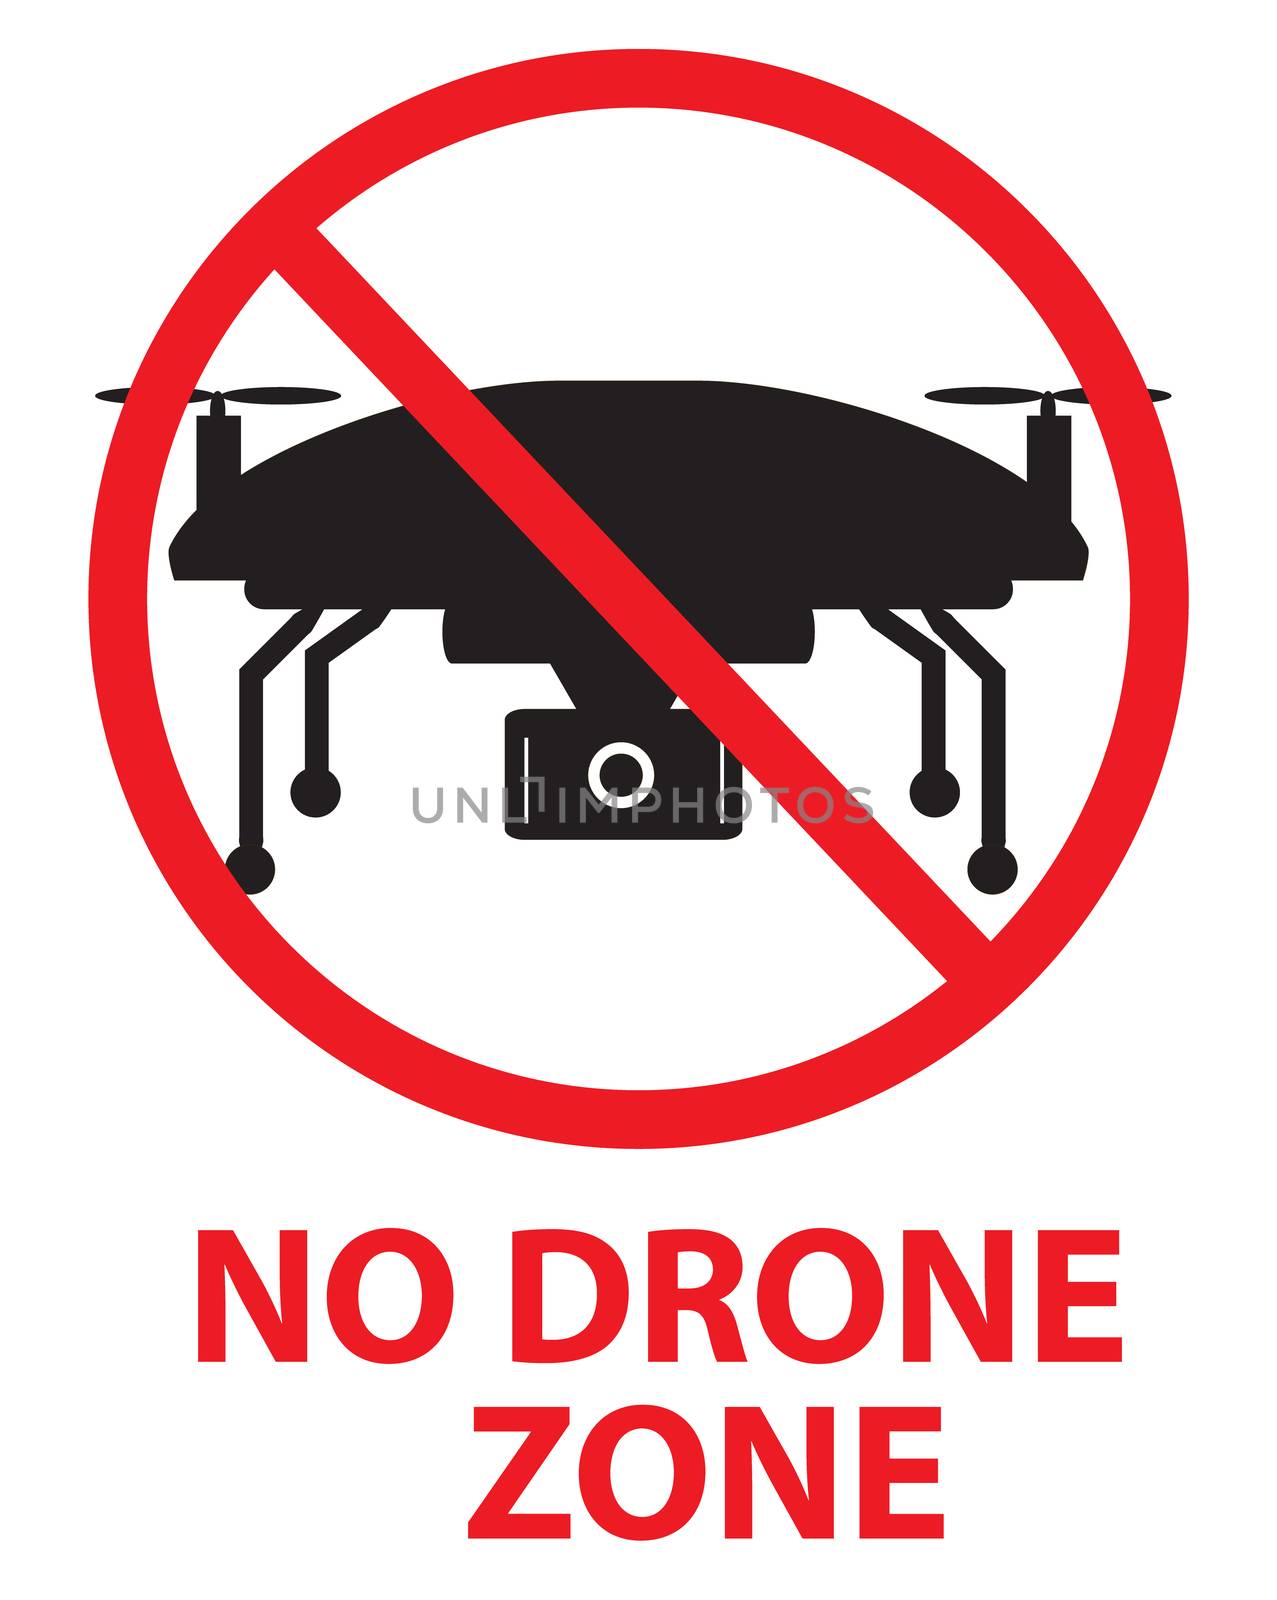 drone flights prohibited in thai area. no drone zone sign. no fly.